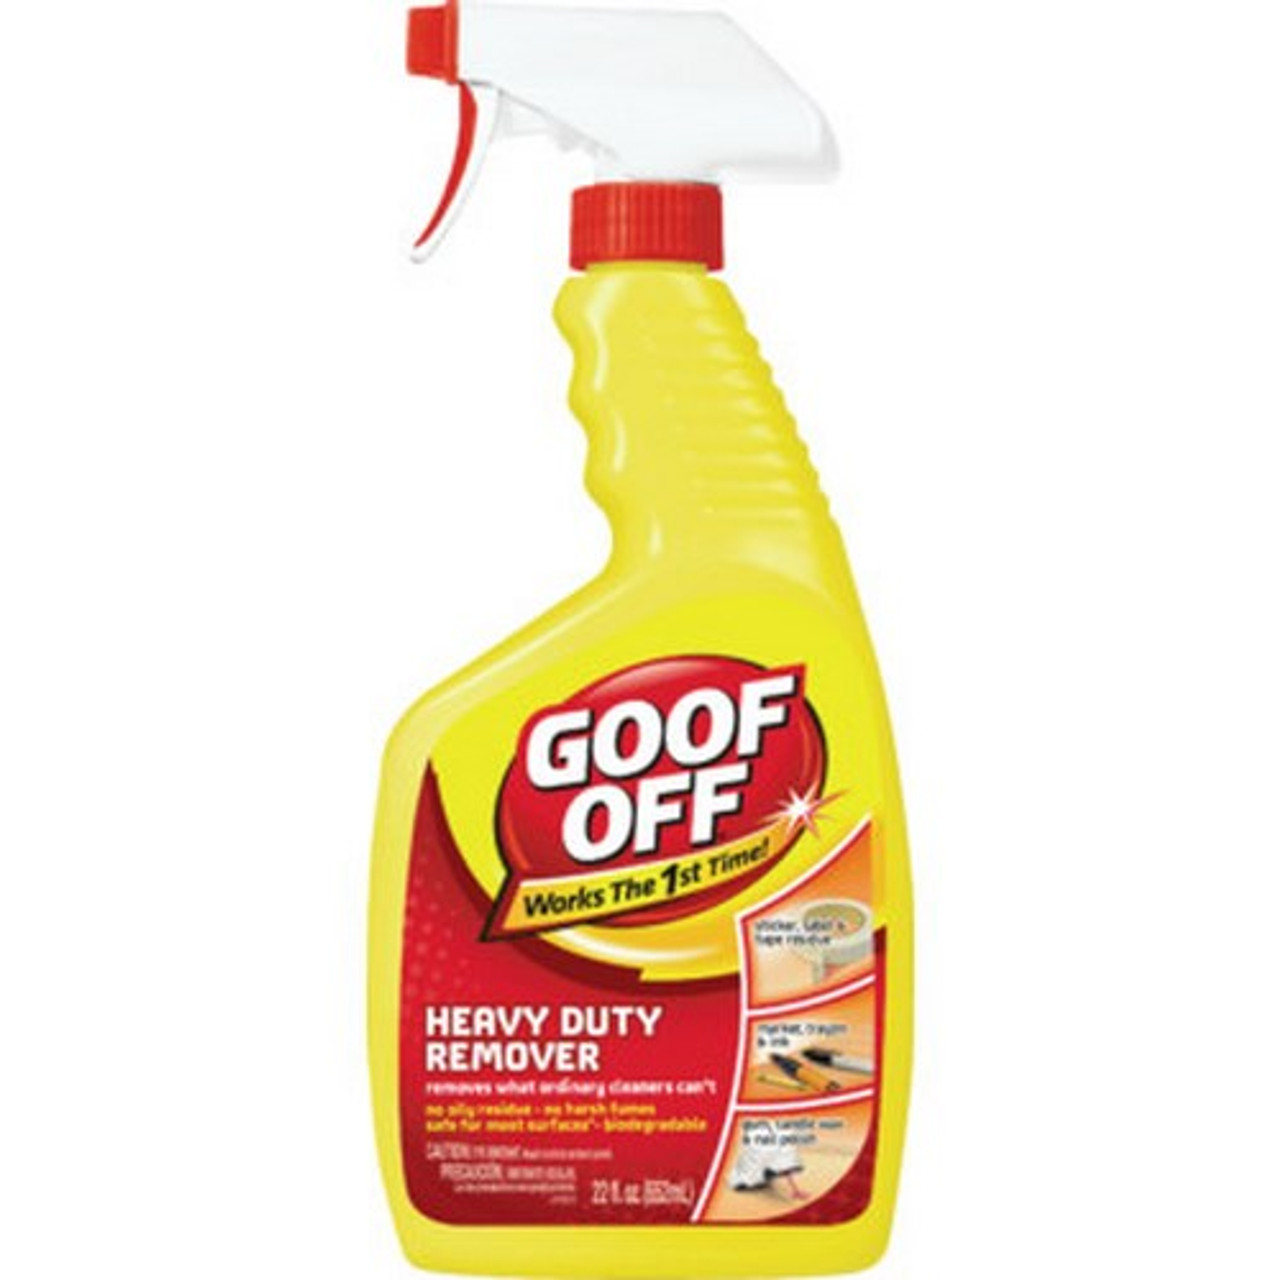  Goof Off Adhesive Remover